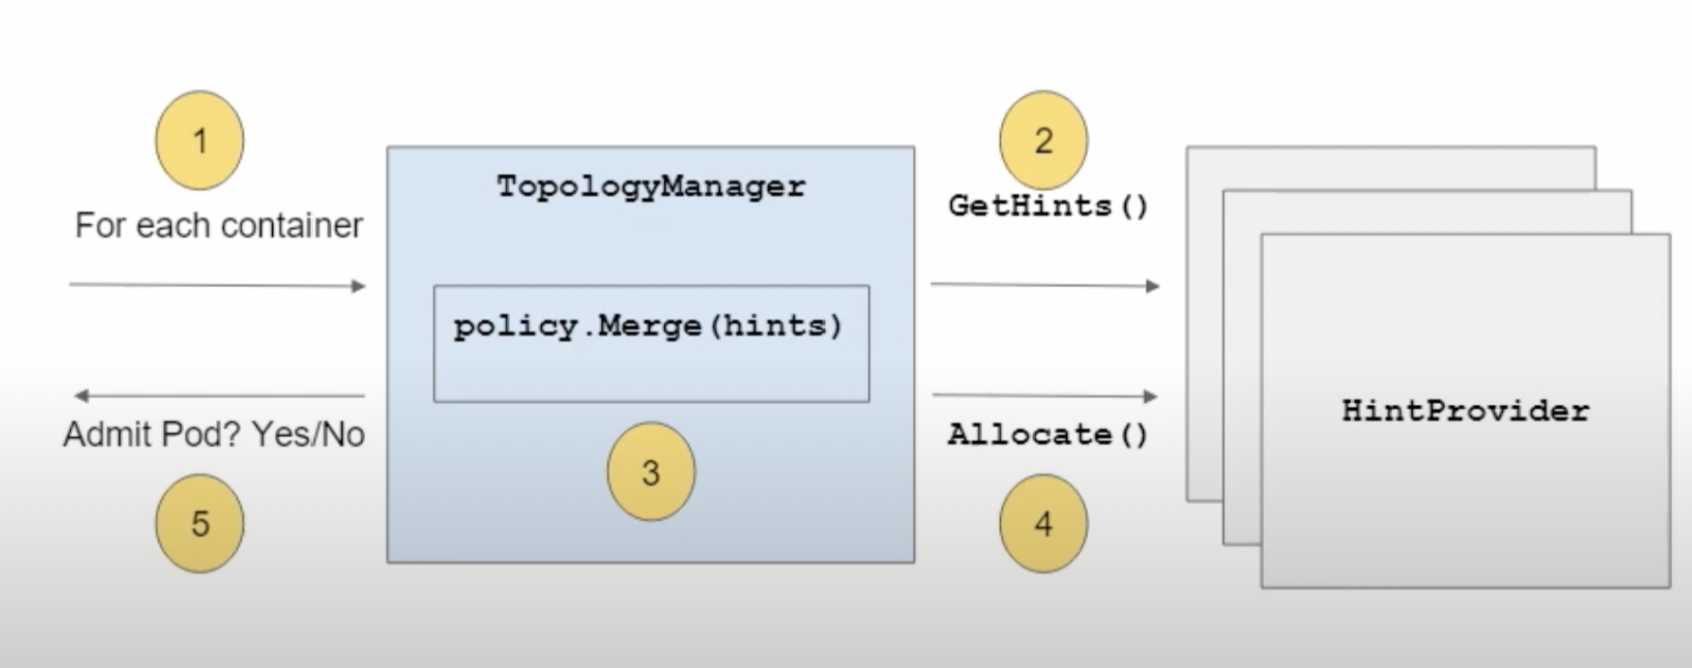 topology-manager-workflow